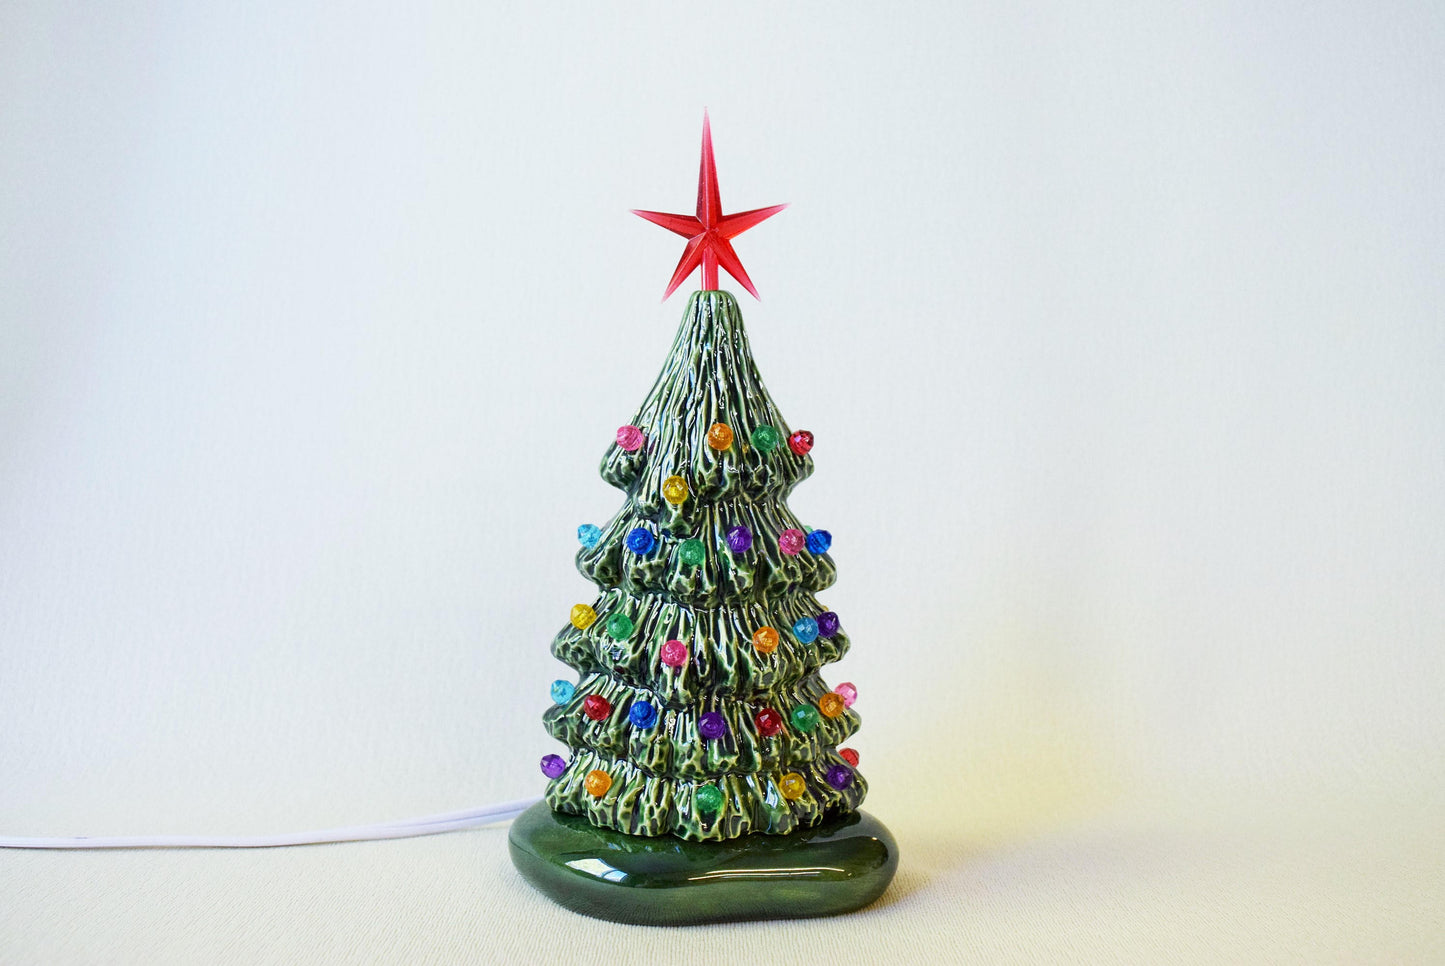 Ceramic Christmas tree in bisque - 5.75 inches tall - DIY